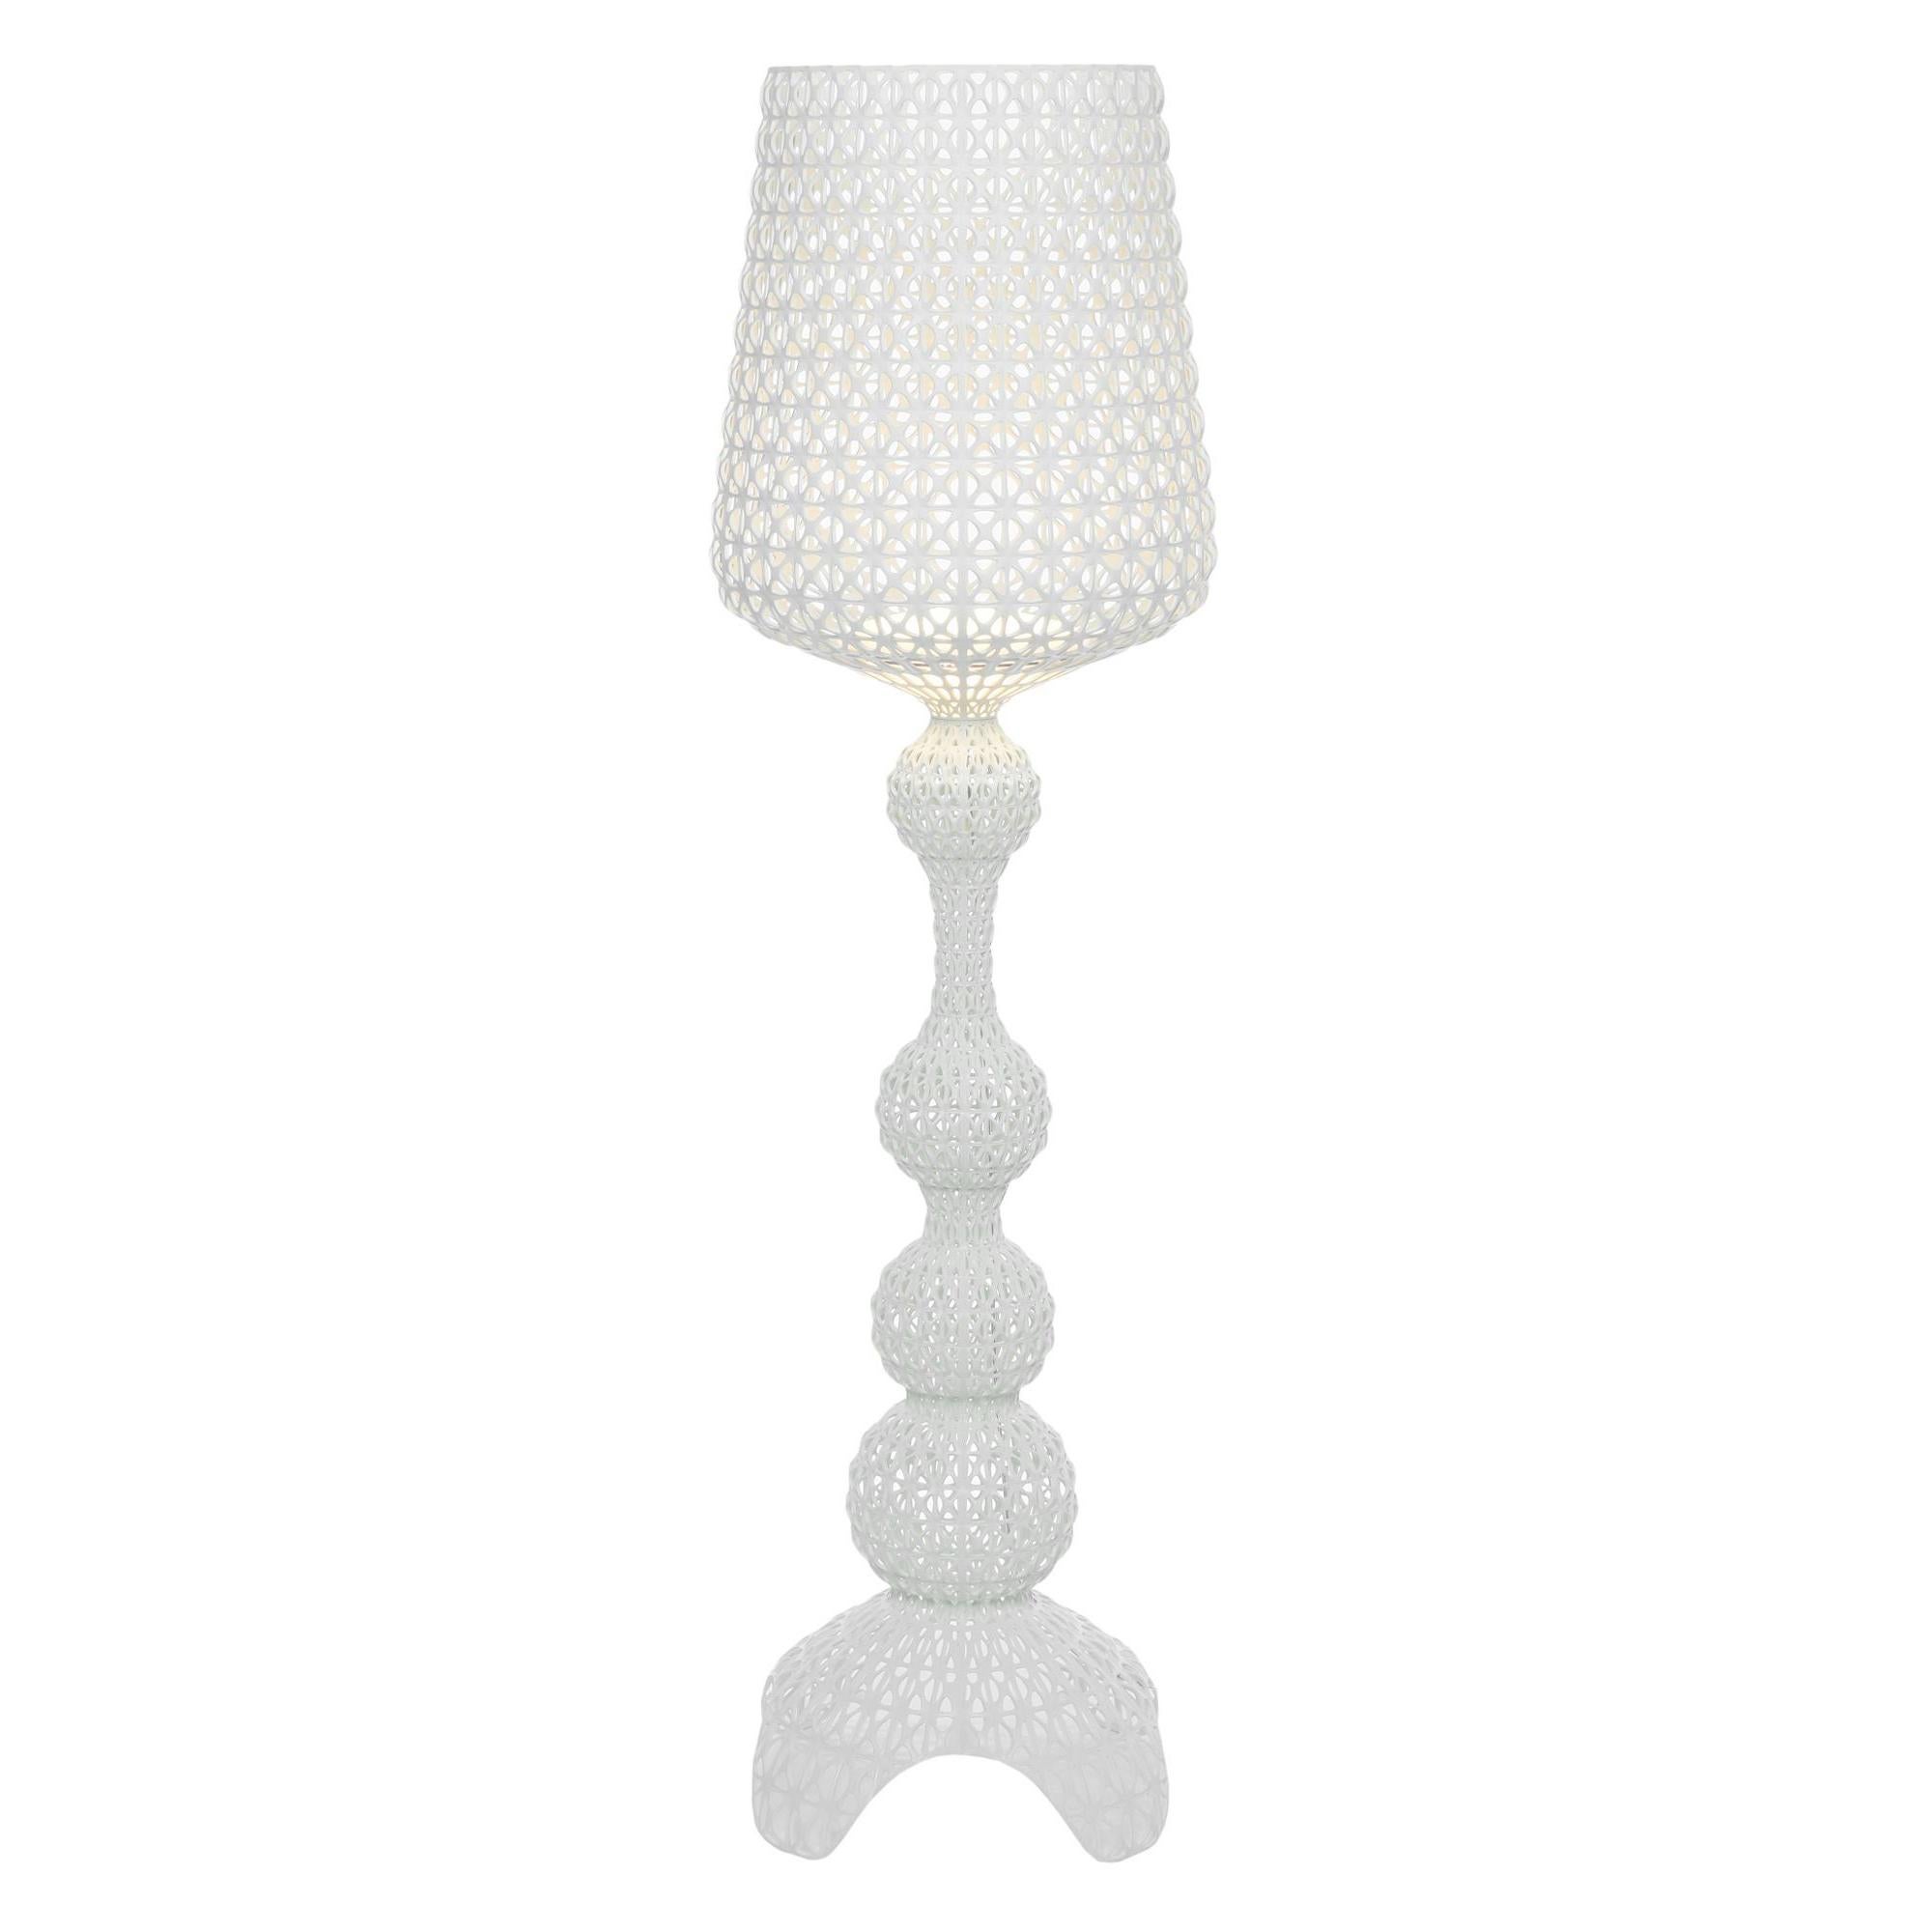 Kartell Kabuki Floor Lamp in Opaque White by Ferruccio Laviani For Sale